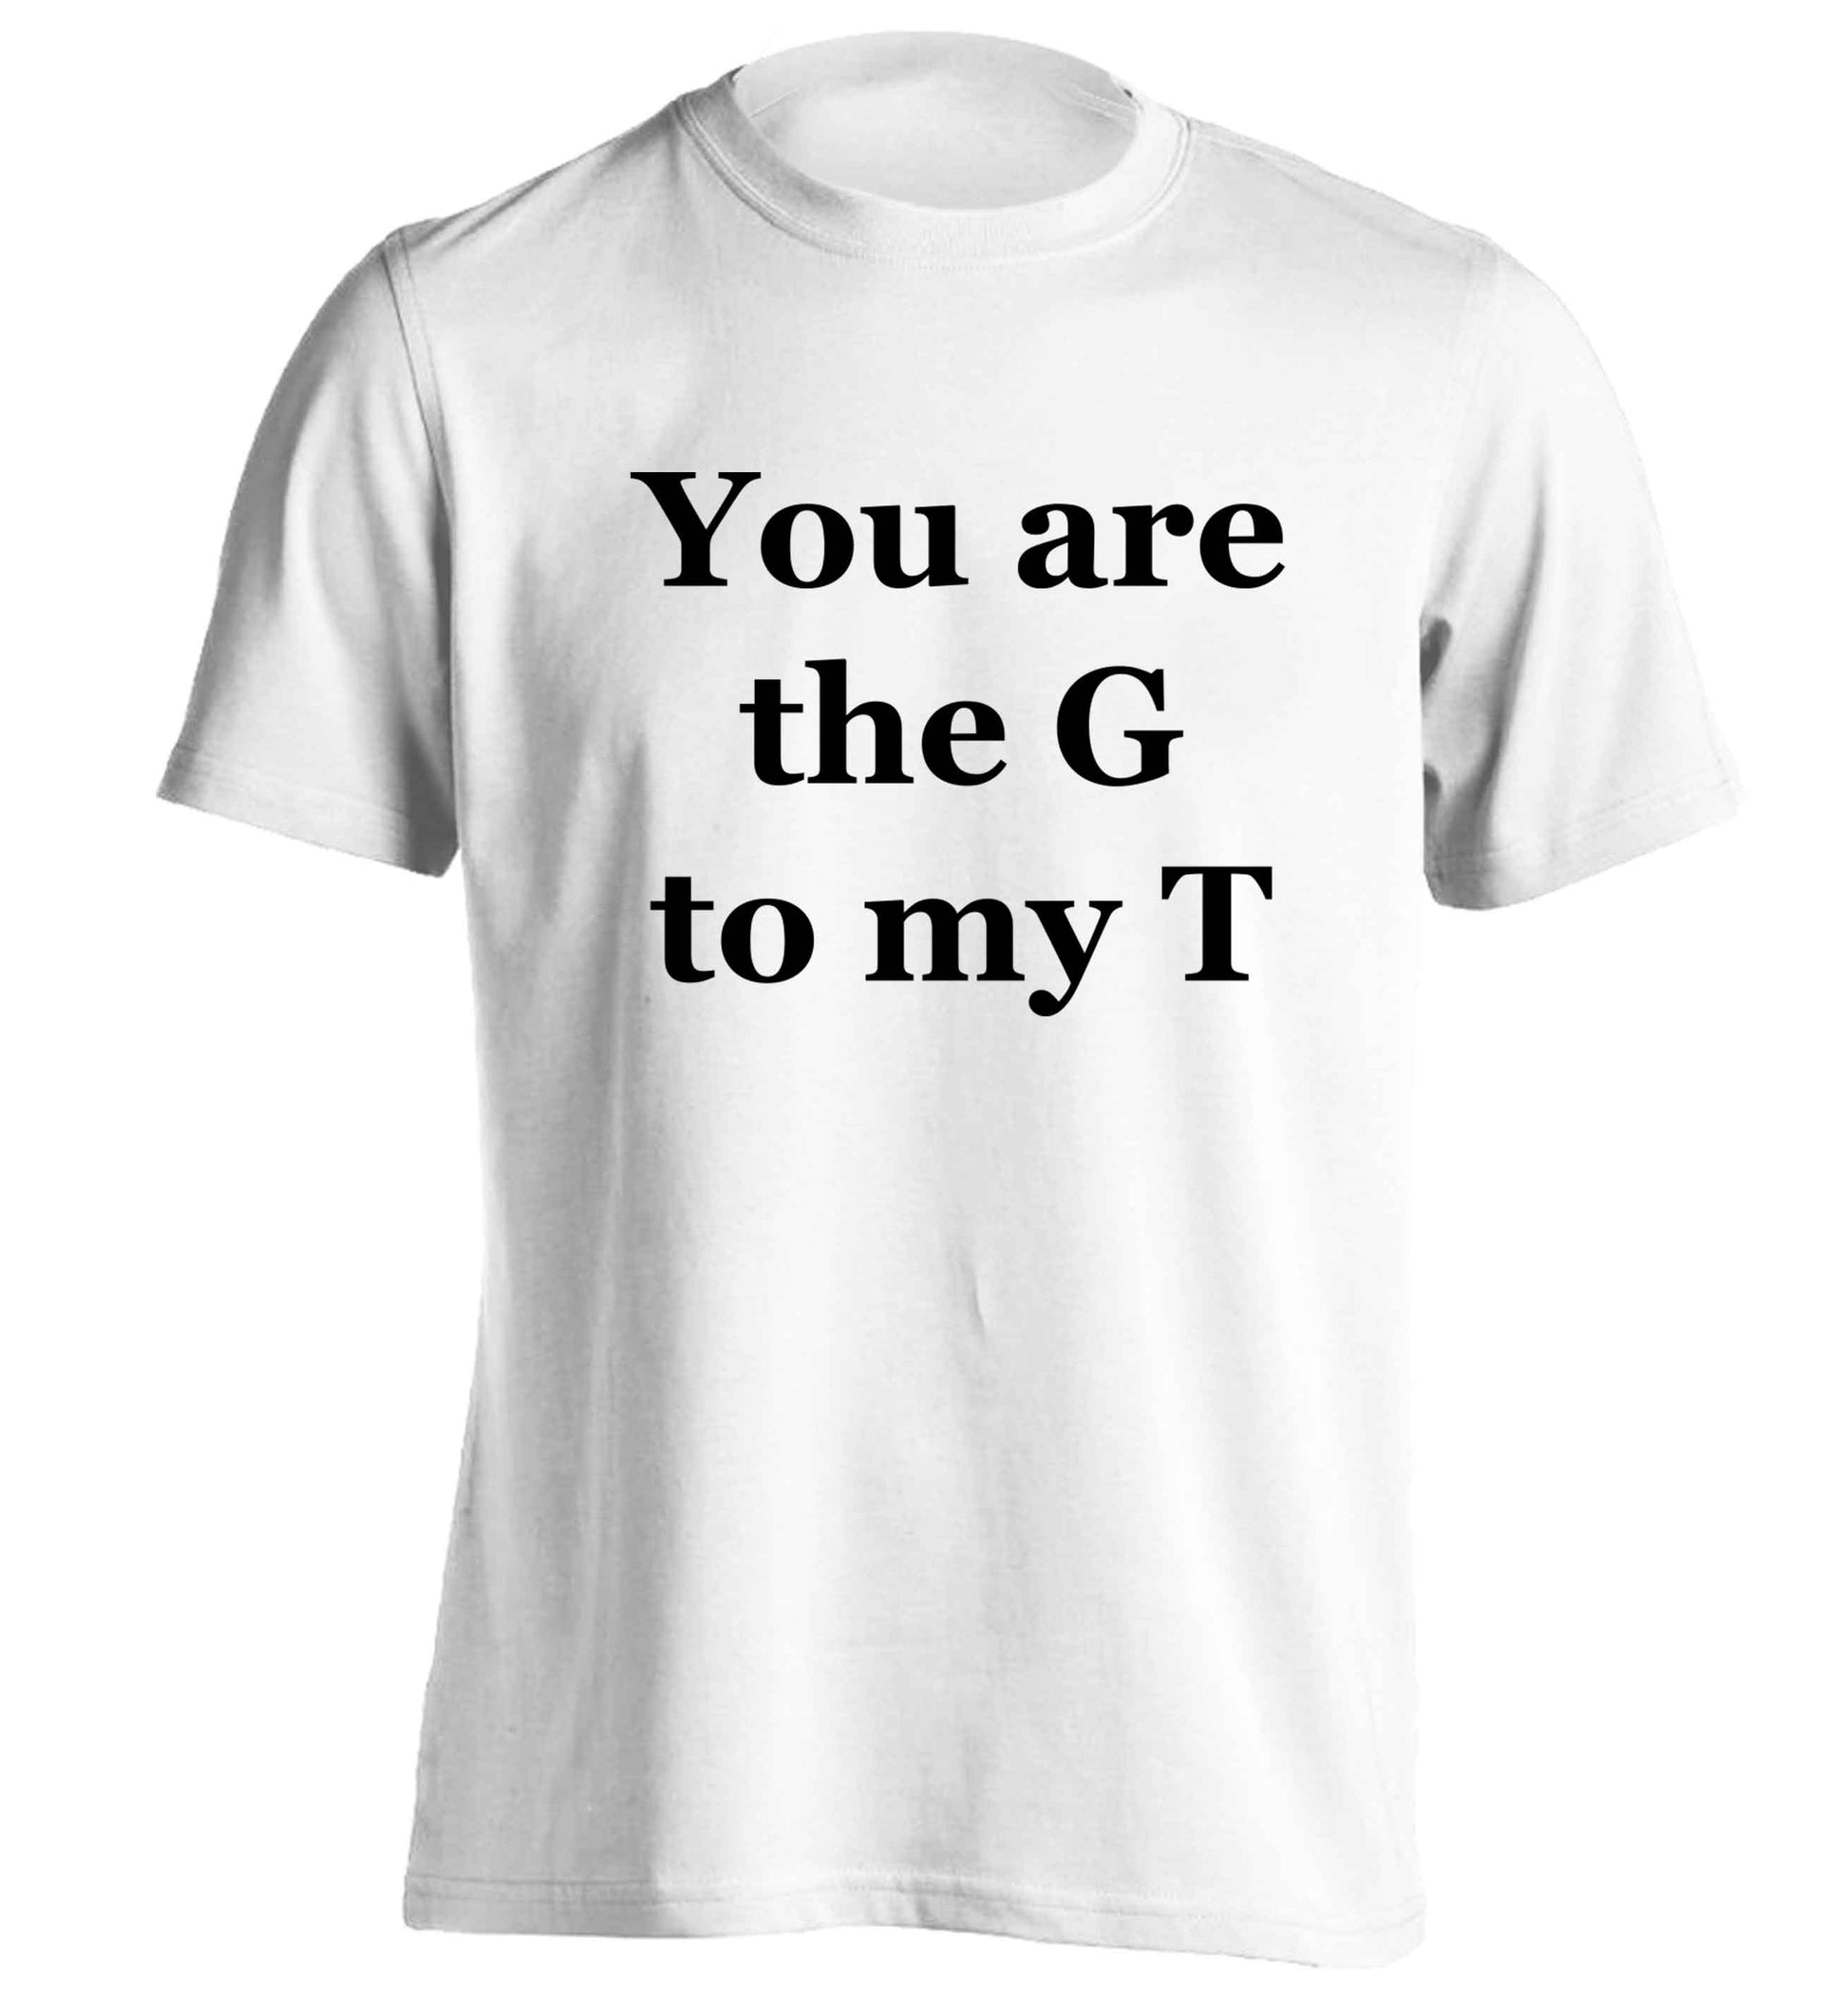 You are the G to my T adults unisex white Tshirt 2XL